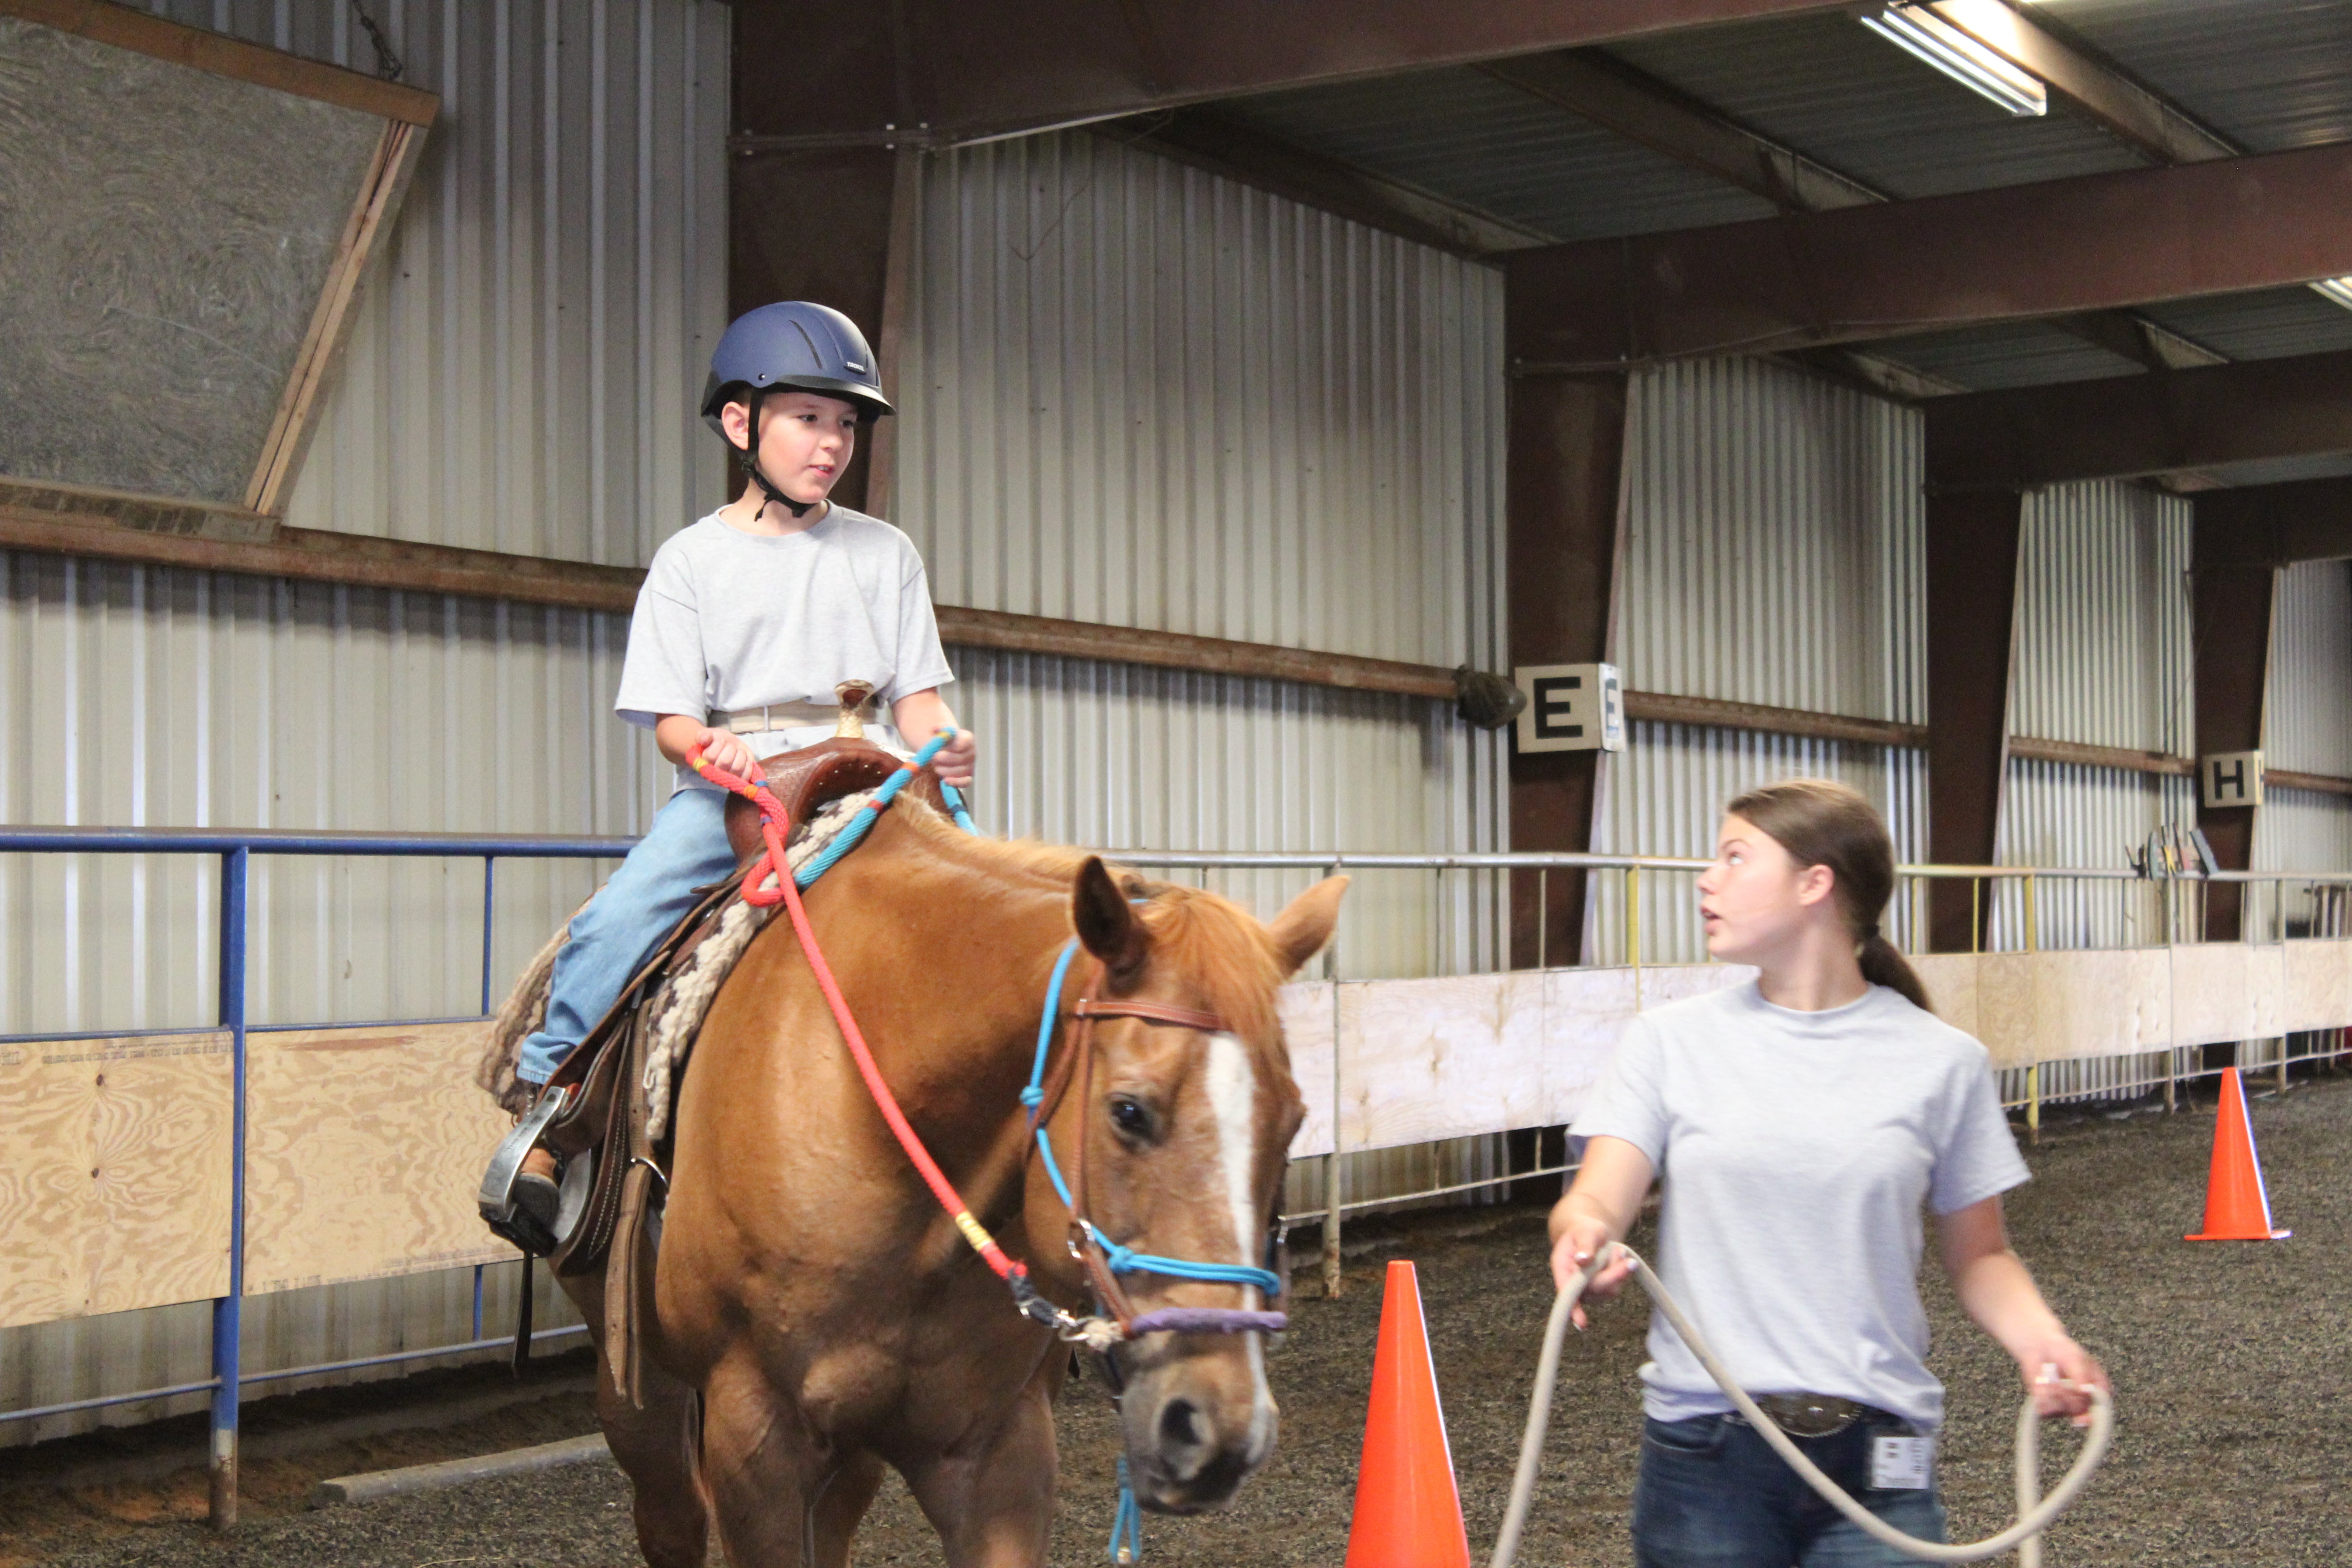 A child sits on the back of a horse, holding the reins, while a volunteer leads the horse around cones in an indoor arena.